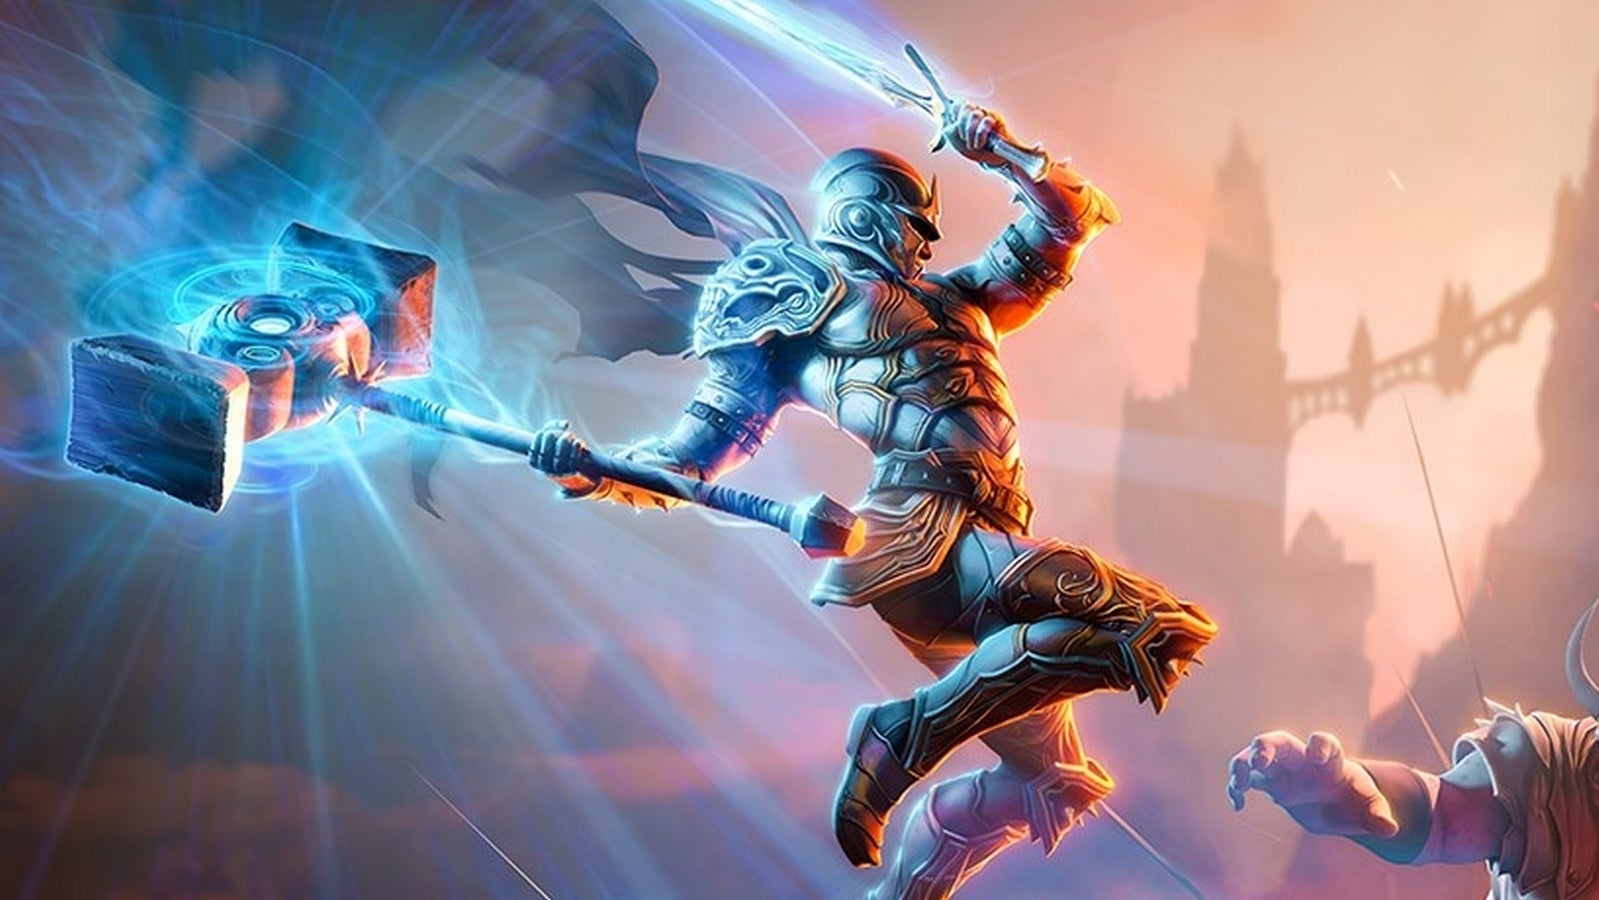 November's leaked PlayStation Plus games include Kingdoms of Amalur,  Knockout City 